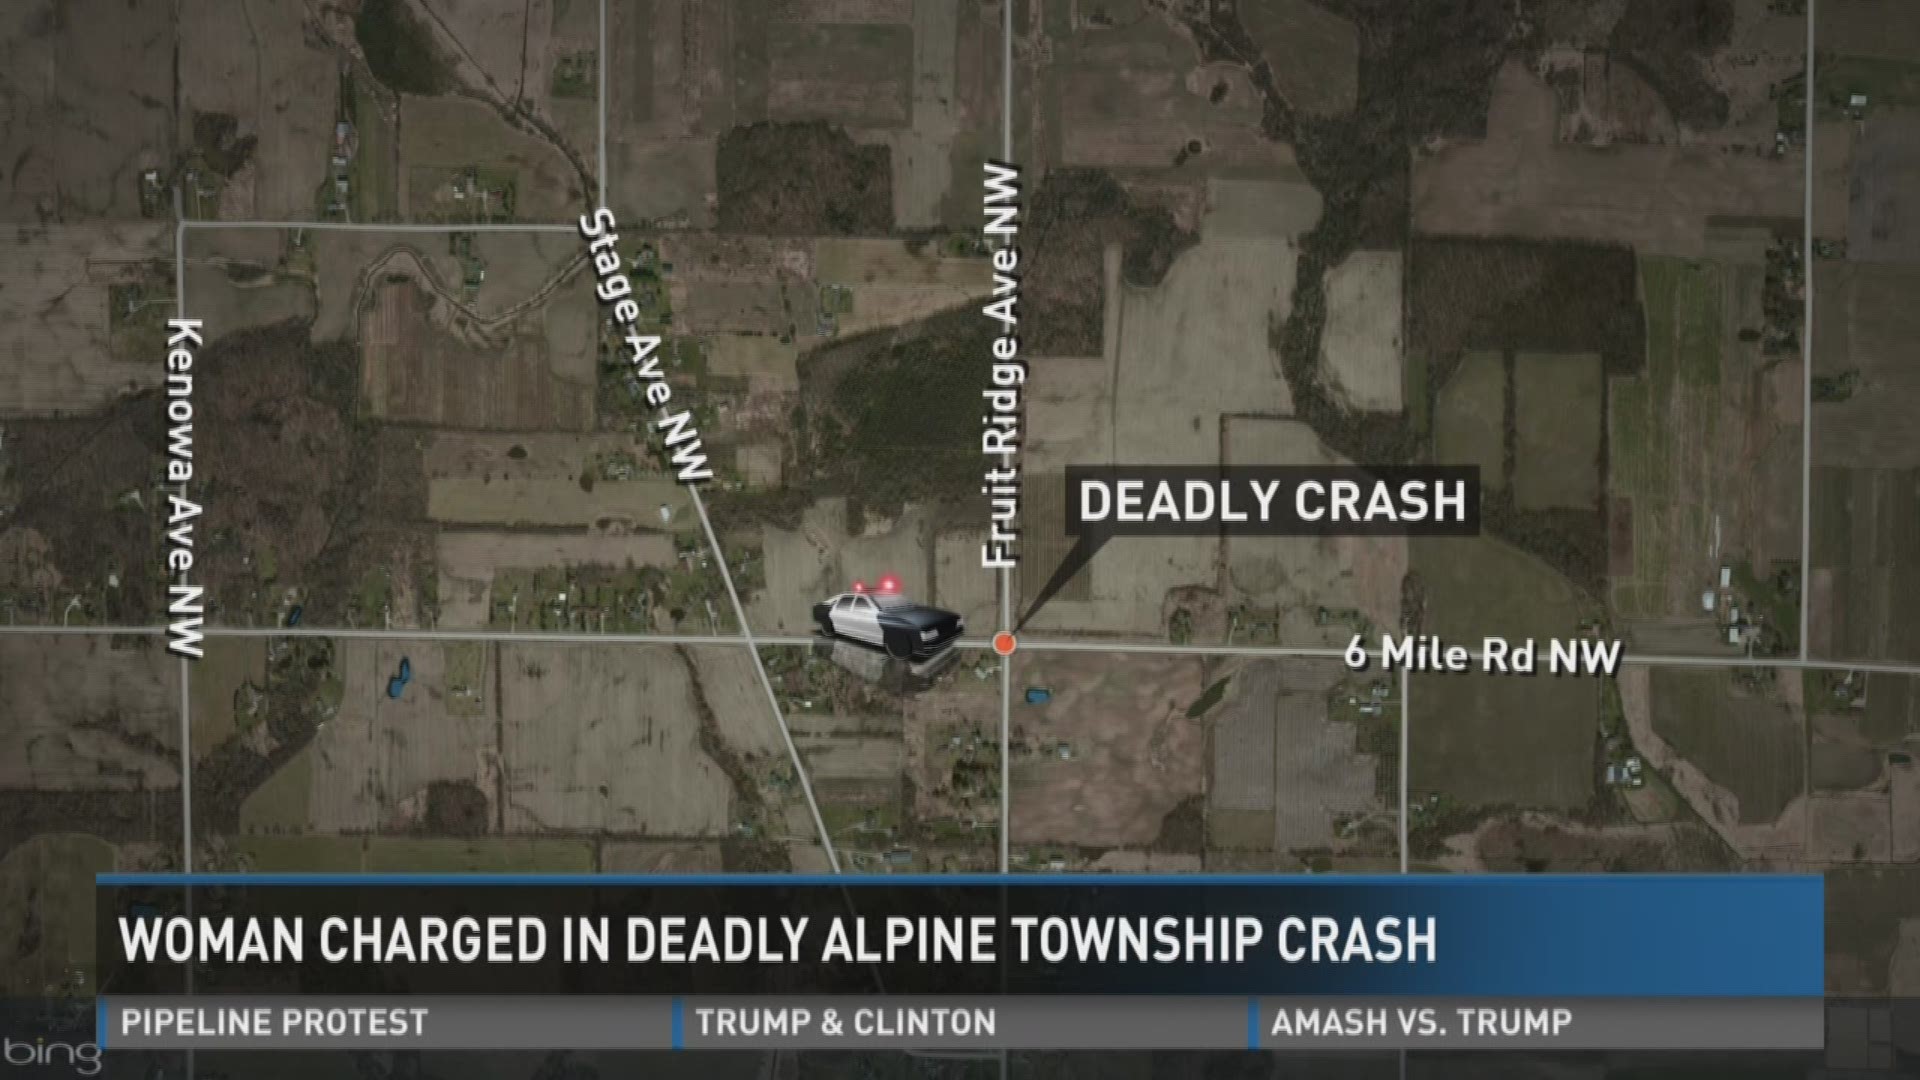 A Walker teenager is facing a misdemeanor charge for a traffic accident that killed another teenager in Alpine Township.